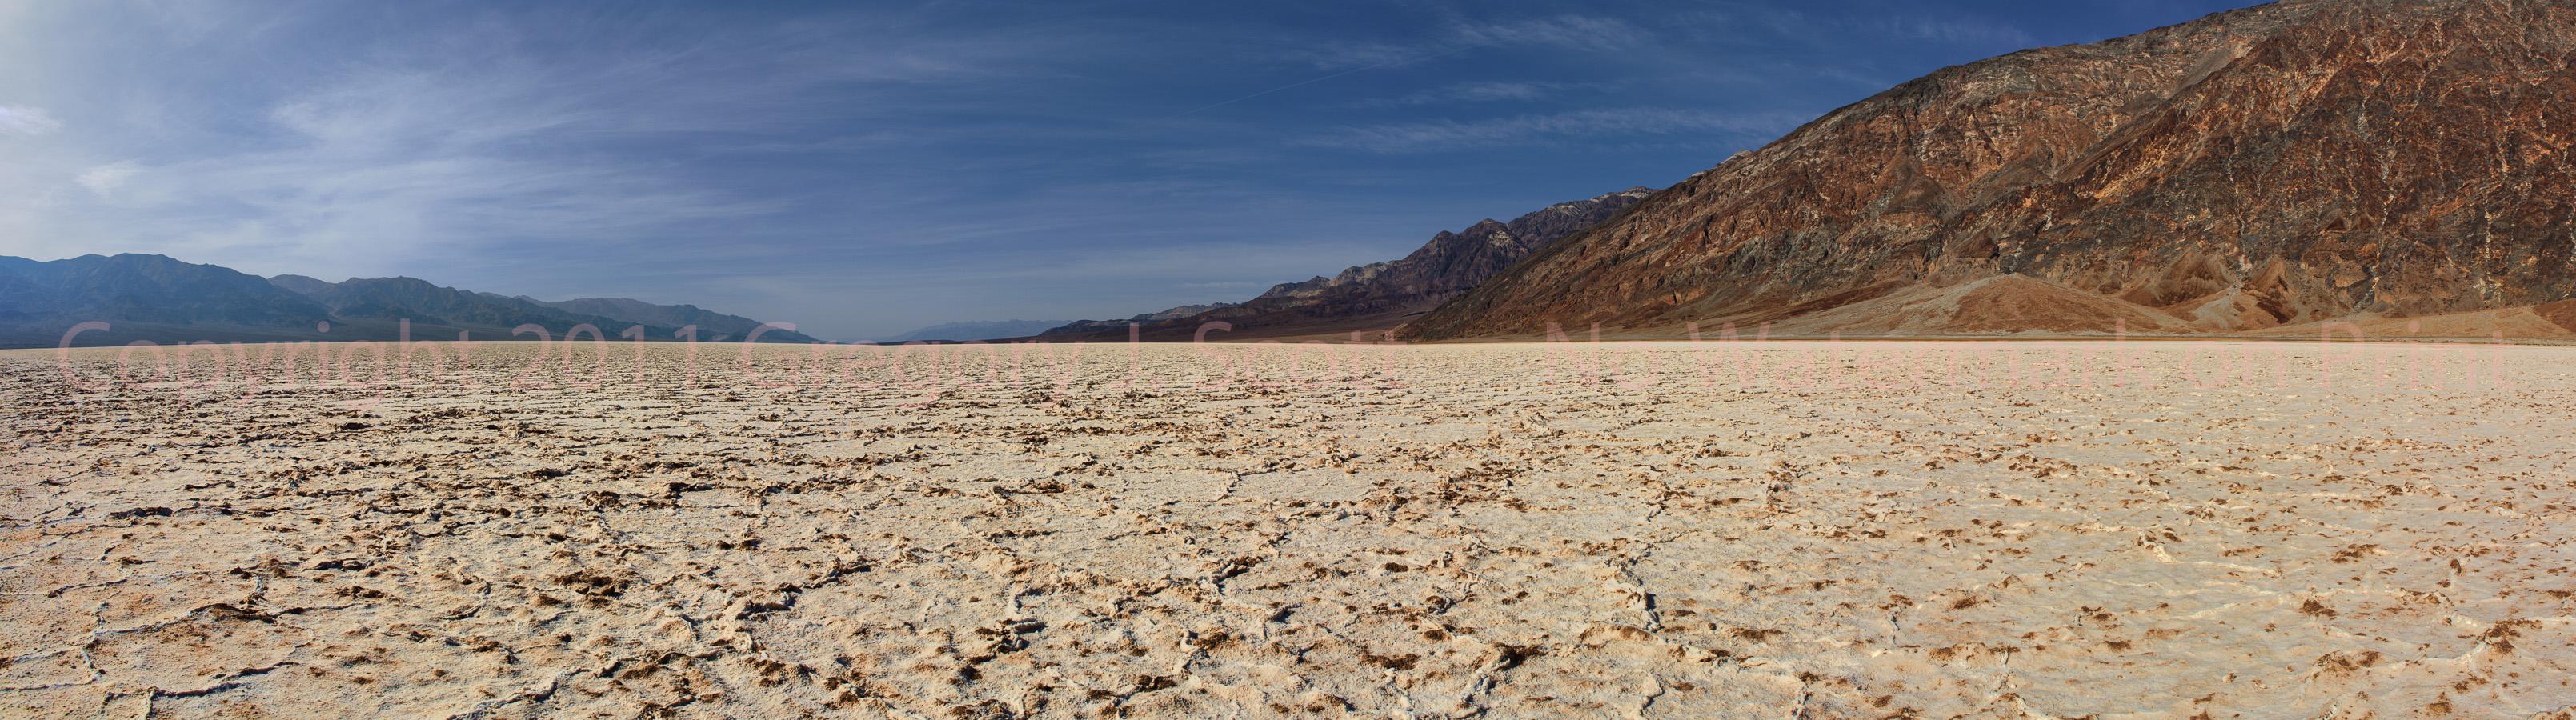 The Bottom of Death Valley, Photographed May 31, 2011 5:40pm